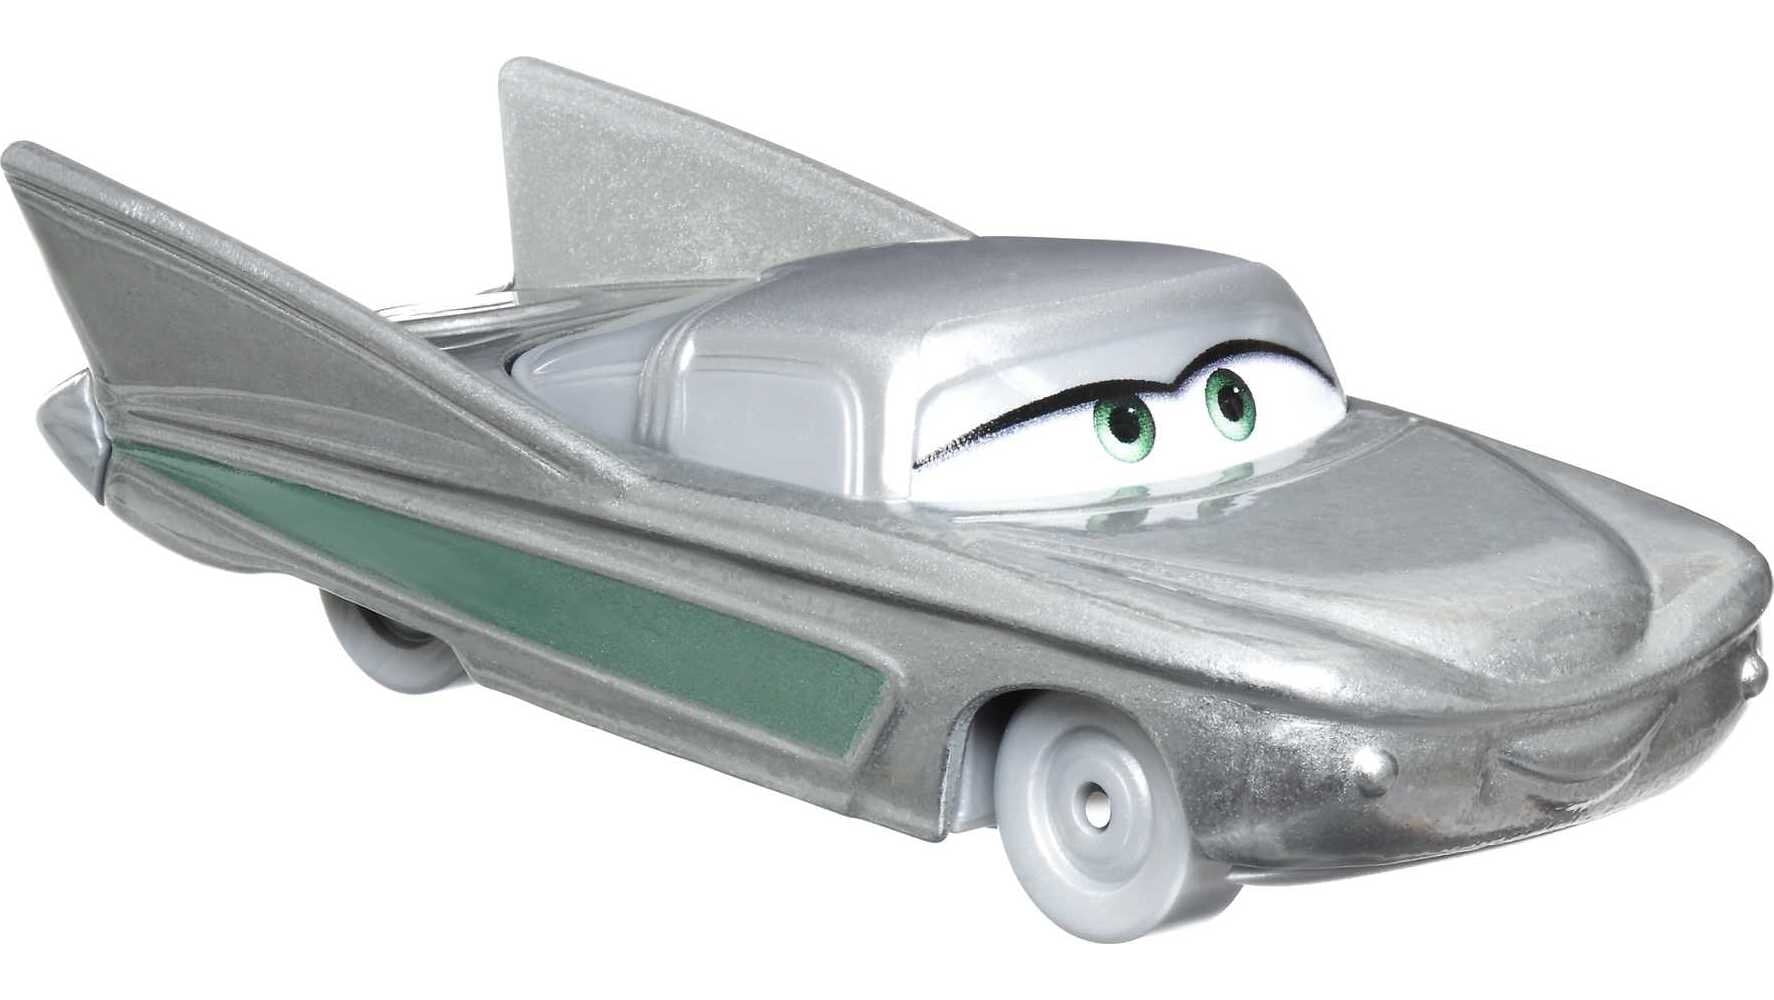 Disney and Pixar Toy Character Vehicle Collectible Car, Scale Die-Cast Disney100 Cars Flo 1:55